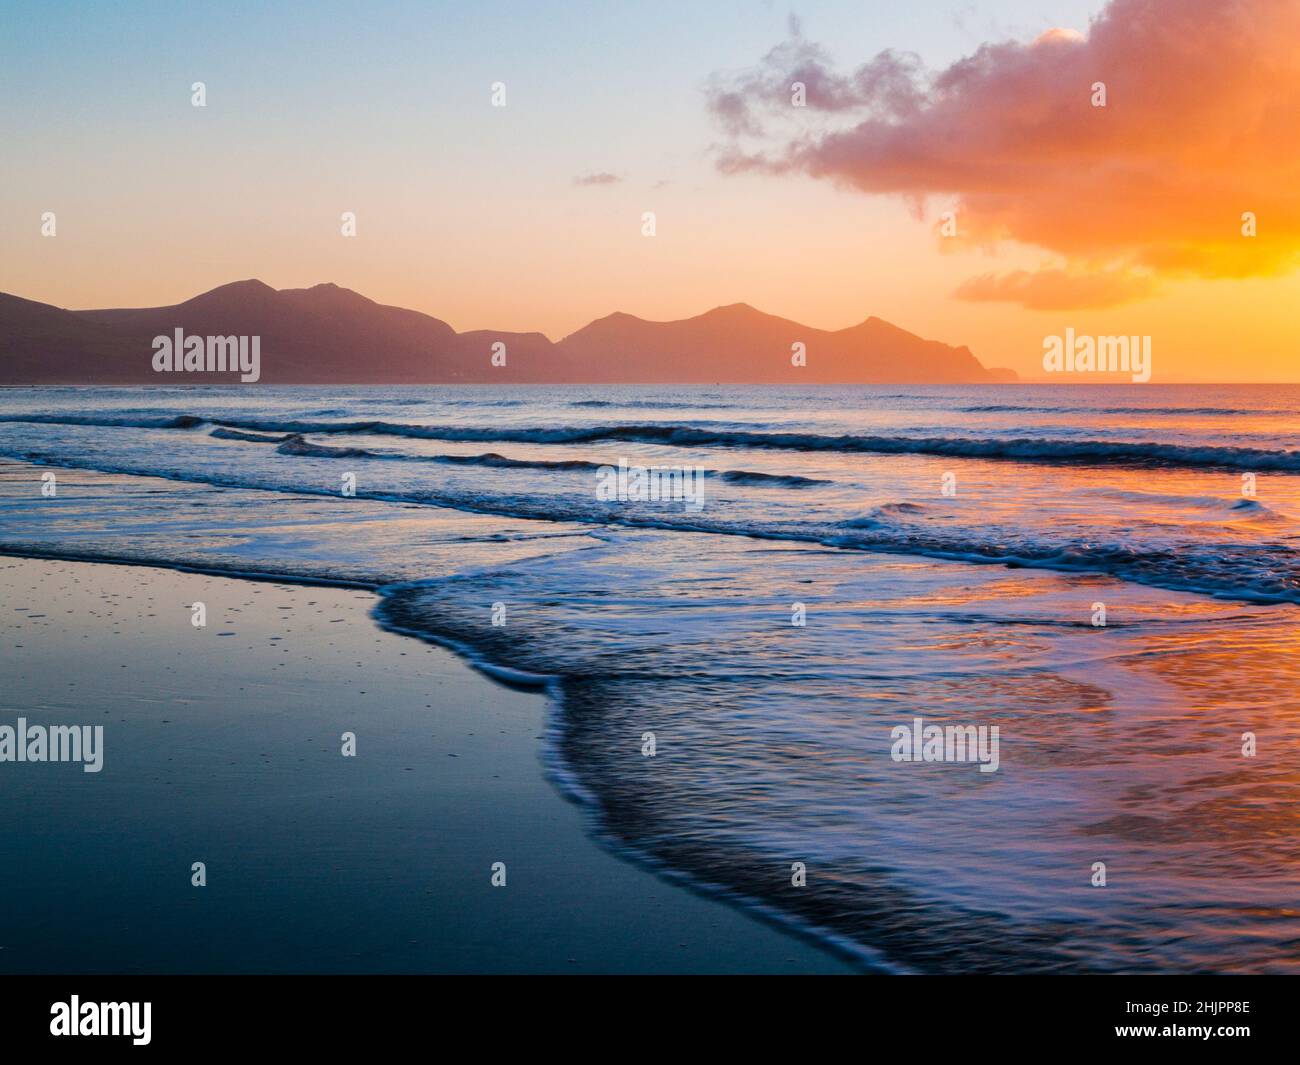 Shoreline on empty beach at low tide with Llyn Peninsula in silhouette at sunset. Dinas Dinlle, Gwynedd, North Wales, UK, Britain Stock Photo